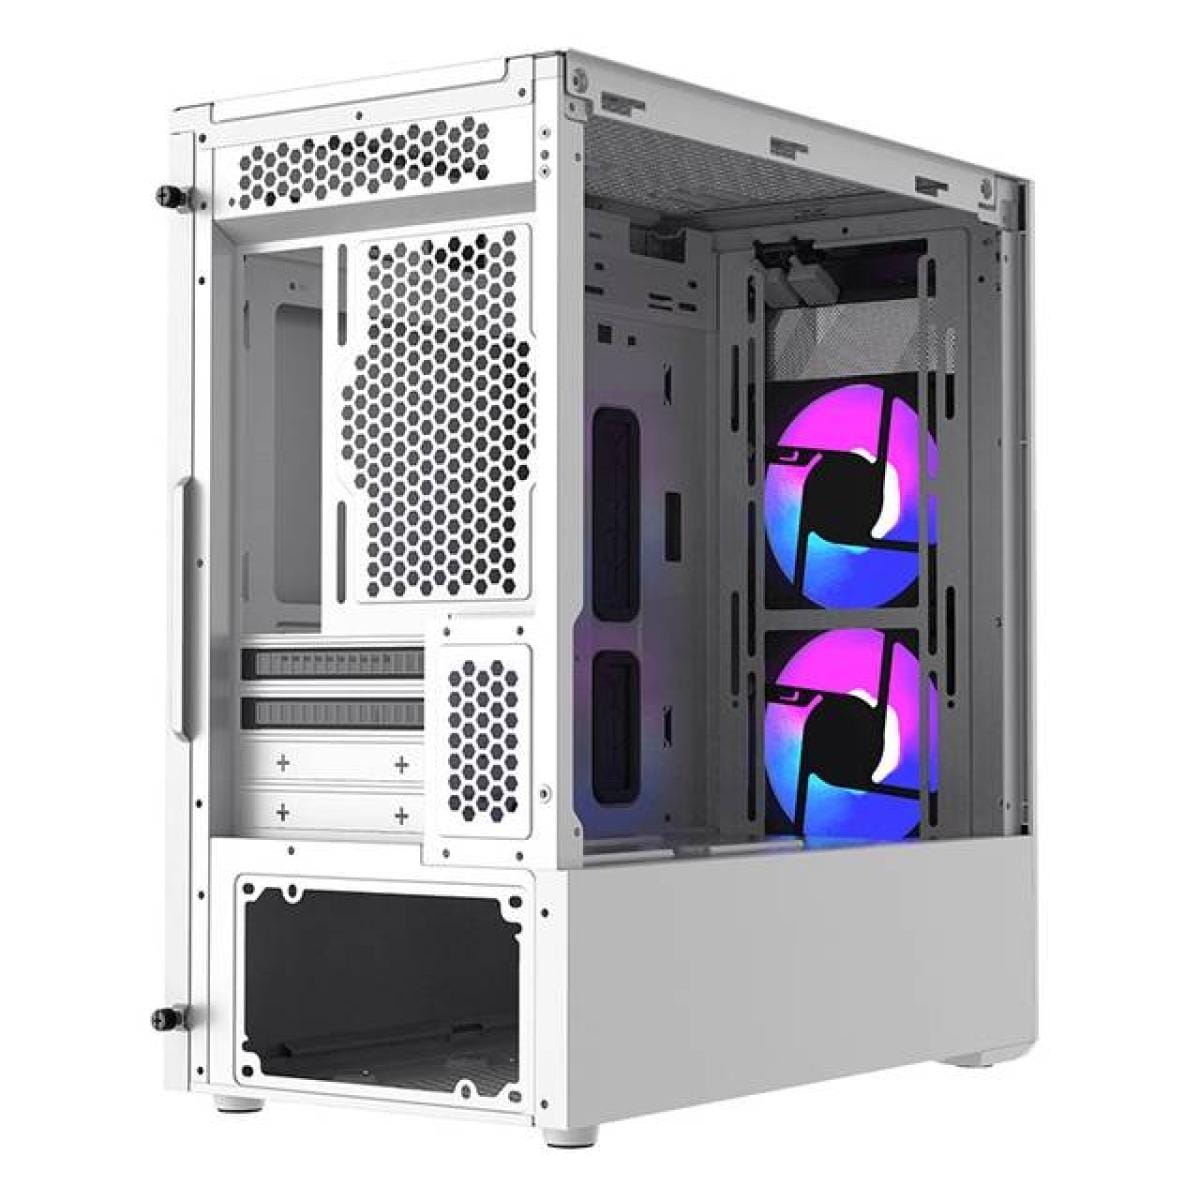 COOLER MASTER COOLER MASTER MasterBox TD300 Mesh White Mini Tower Tempered Glass Gaming Case w 2x ARGB Fans